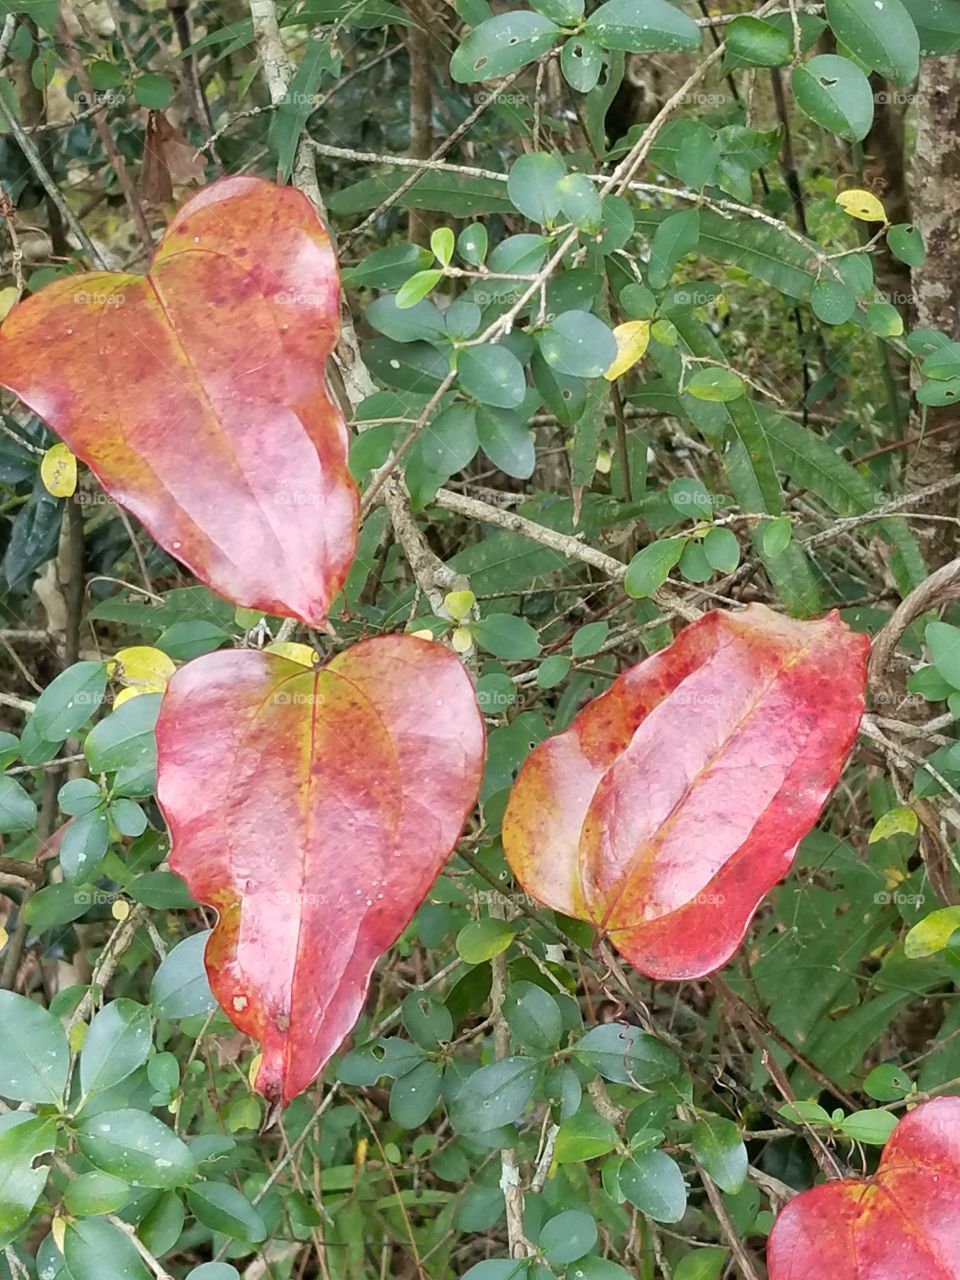 All turning colors